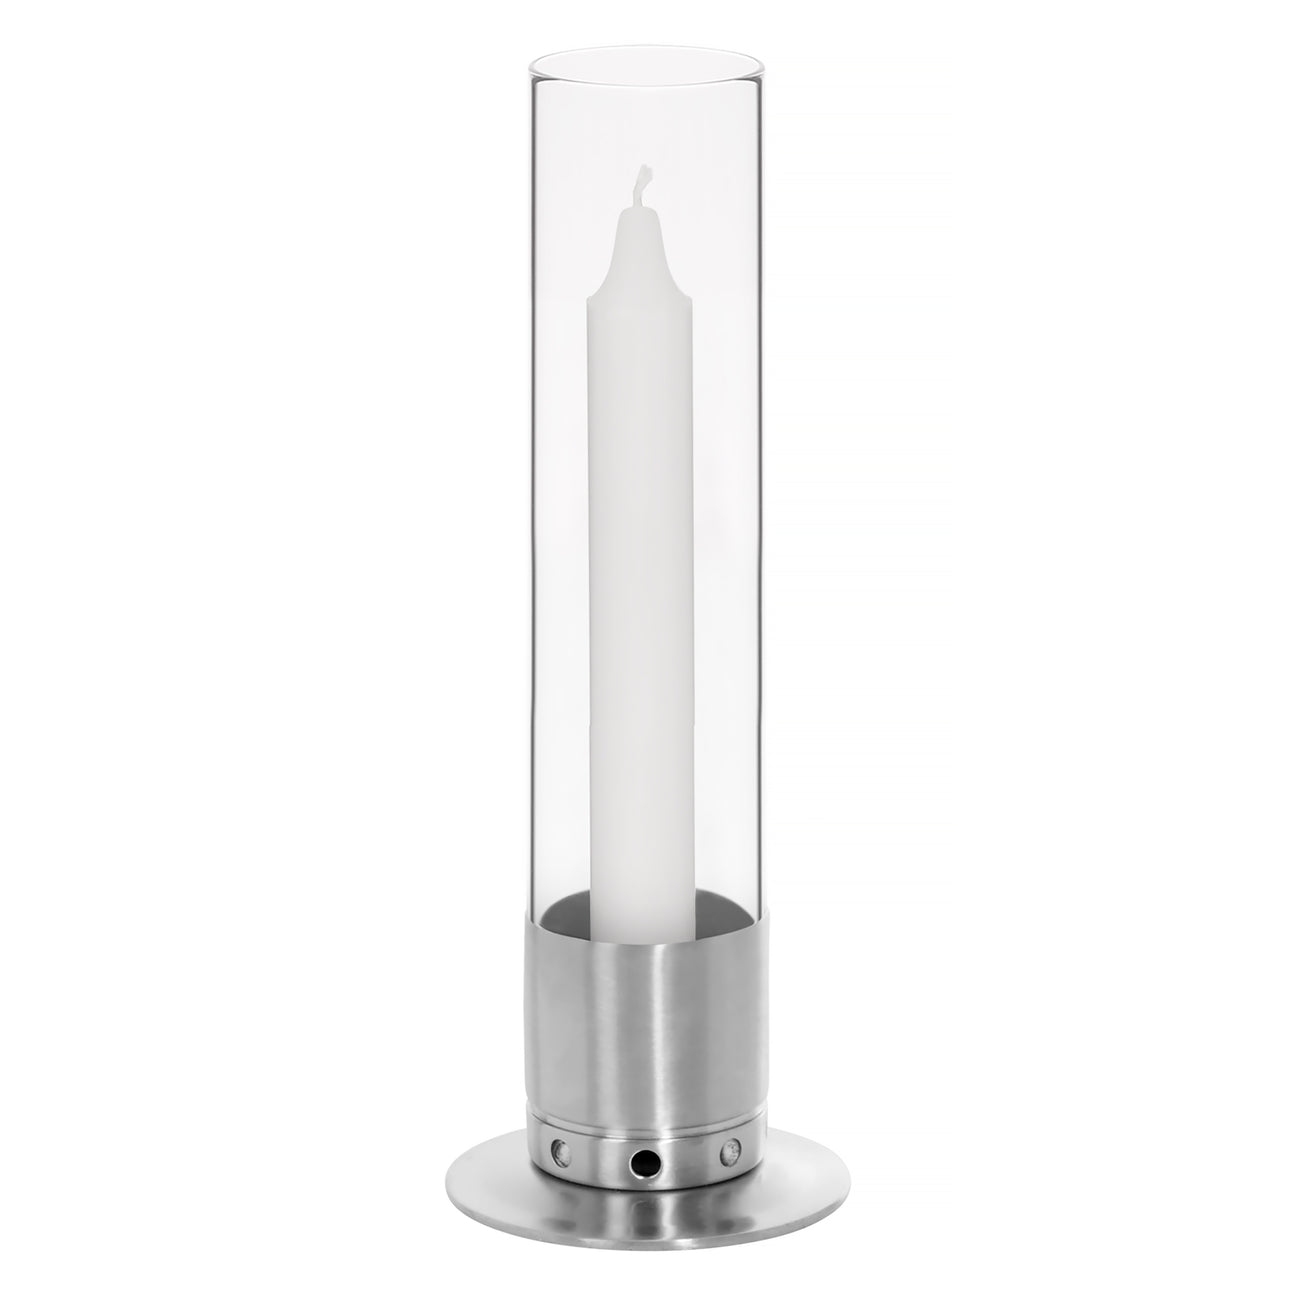 Hurricane Candle Holder | Brushed Steel - Crush Concept